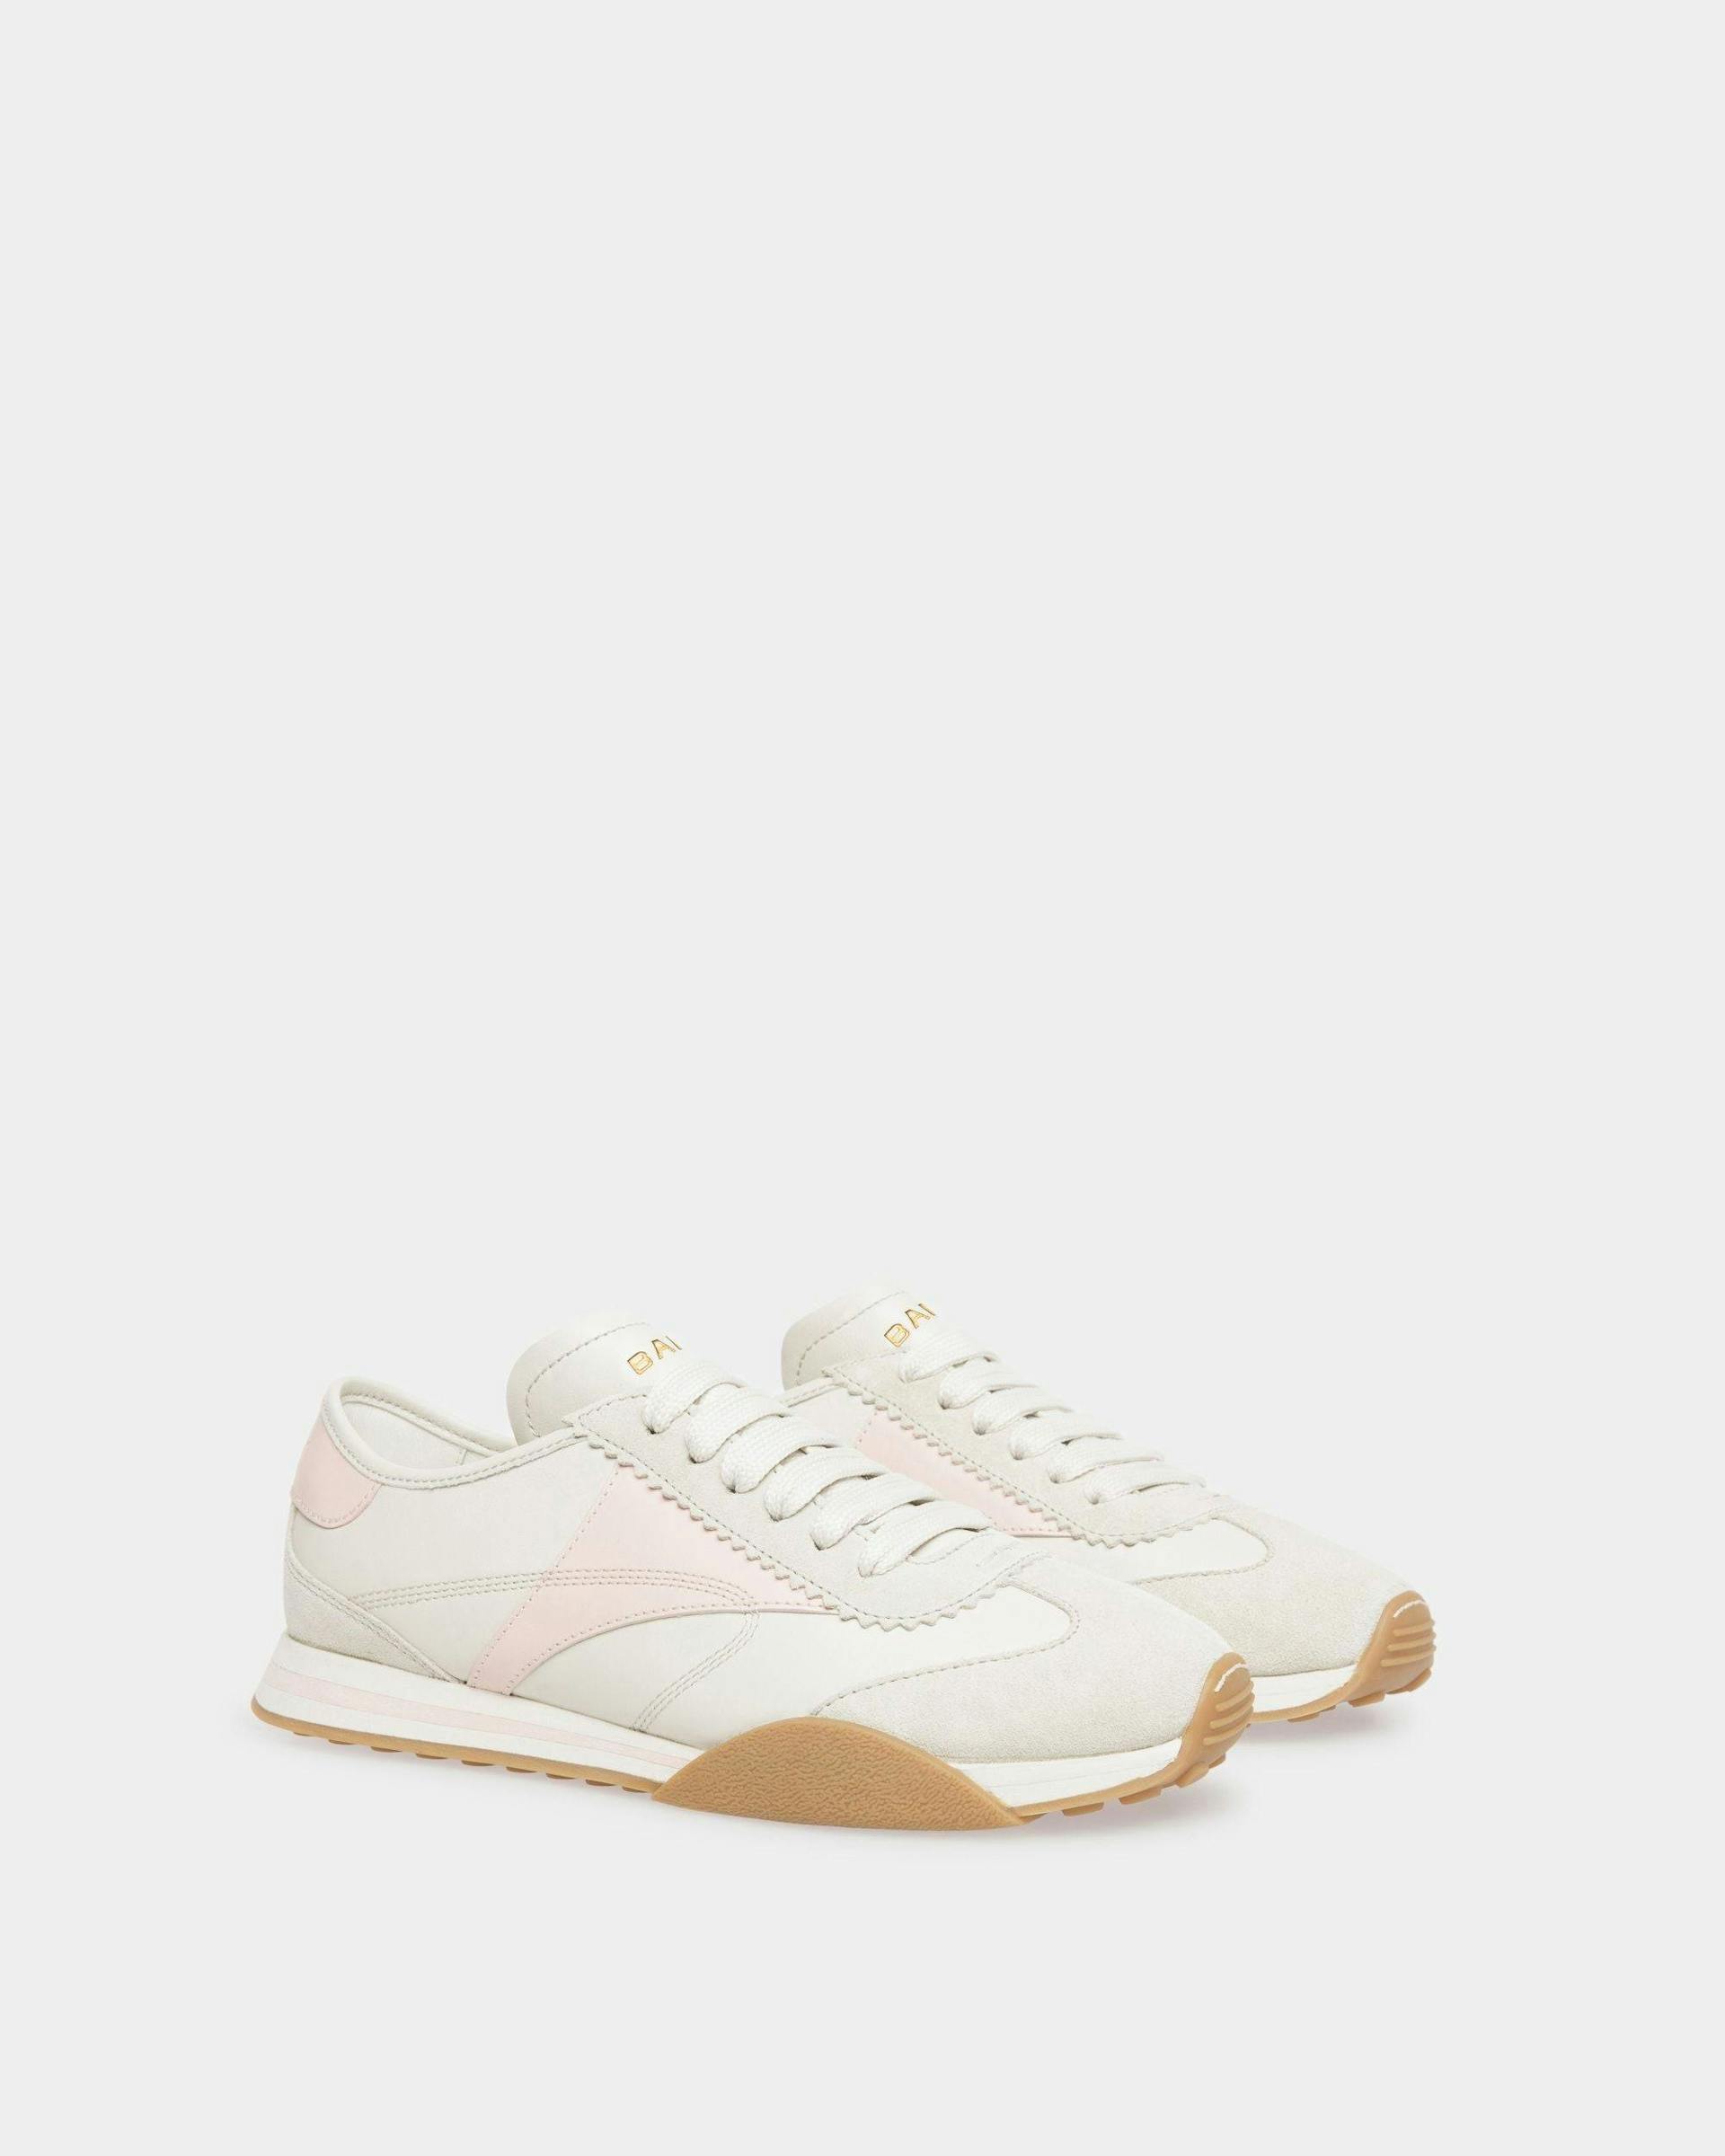 Women's Sussex Sneakers In Dusty White And Rose Leather | Bally | Still Life 3/4 Front